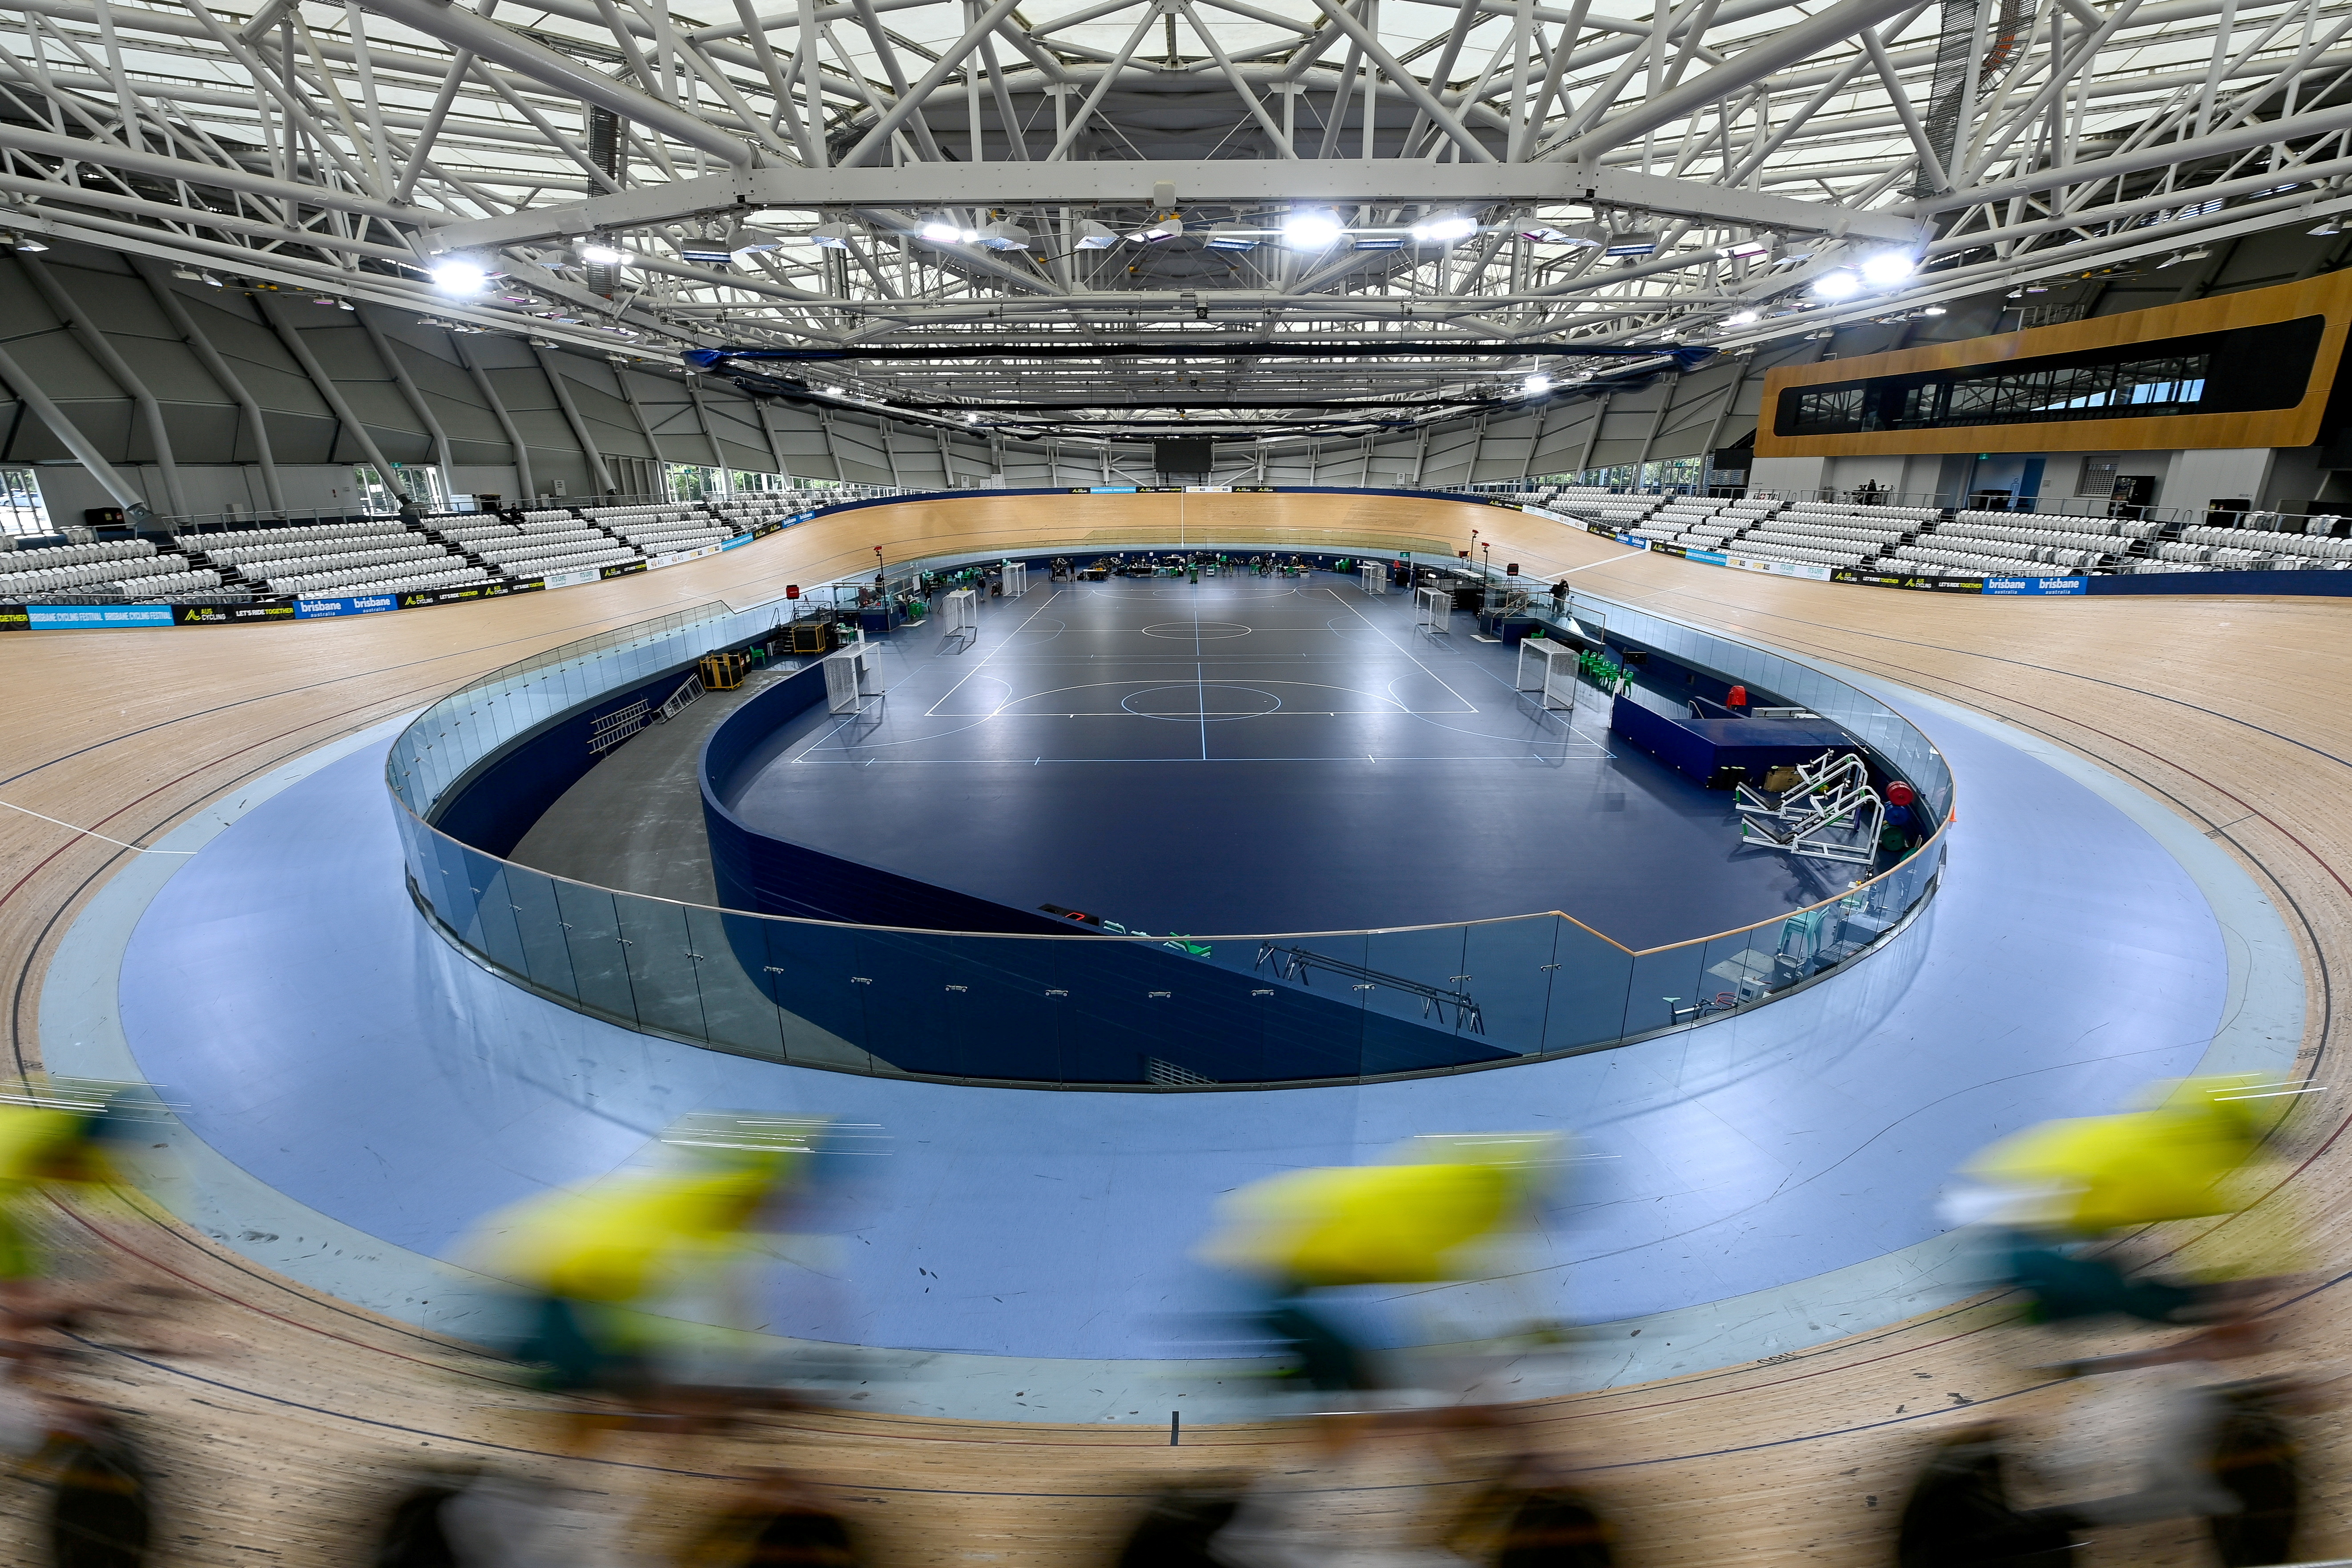 The Australian Olympic Cycling team trains at the Anna Meares Velodrome in Brisbane